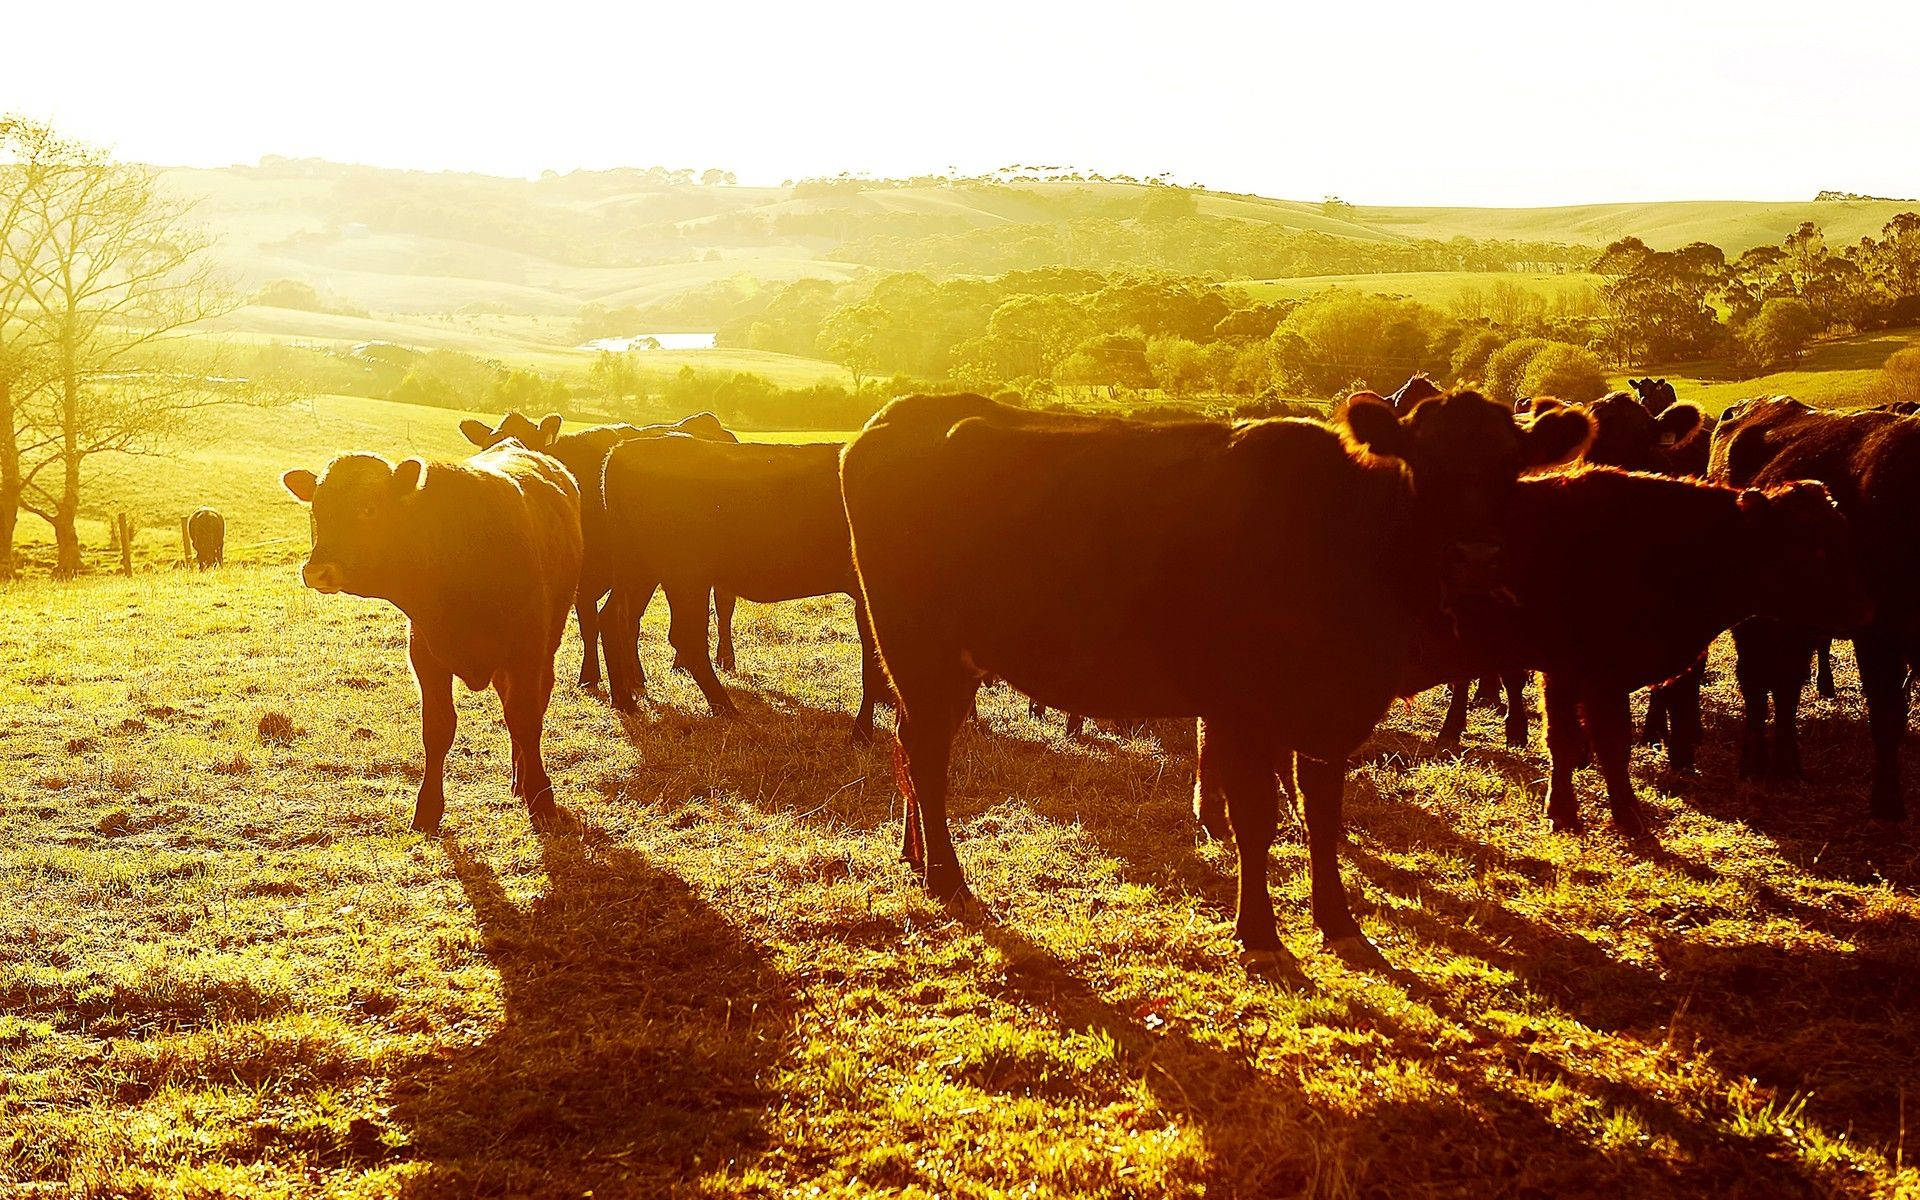 “A peaceful moment between a herd of cows in a stunning sunset” Wallpaper